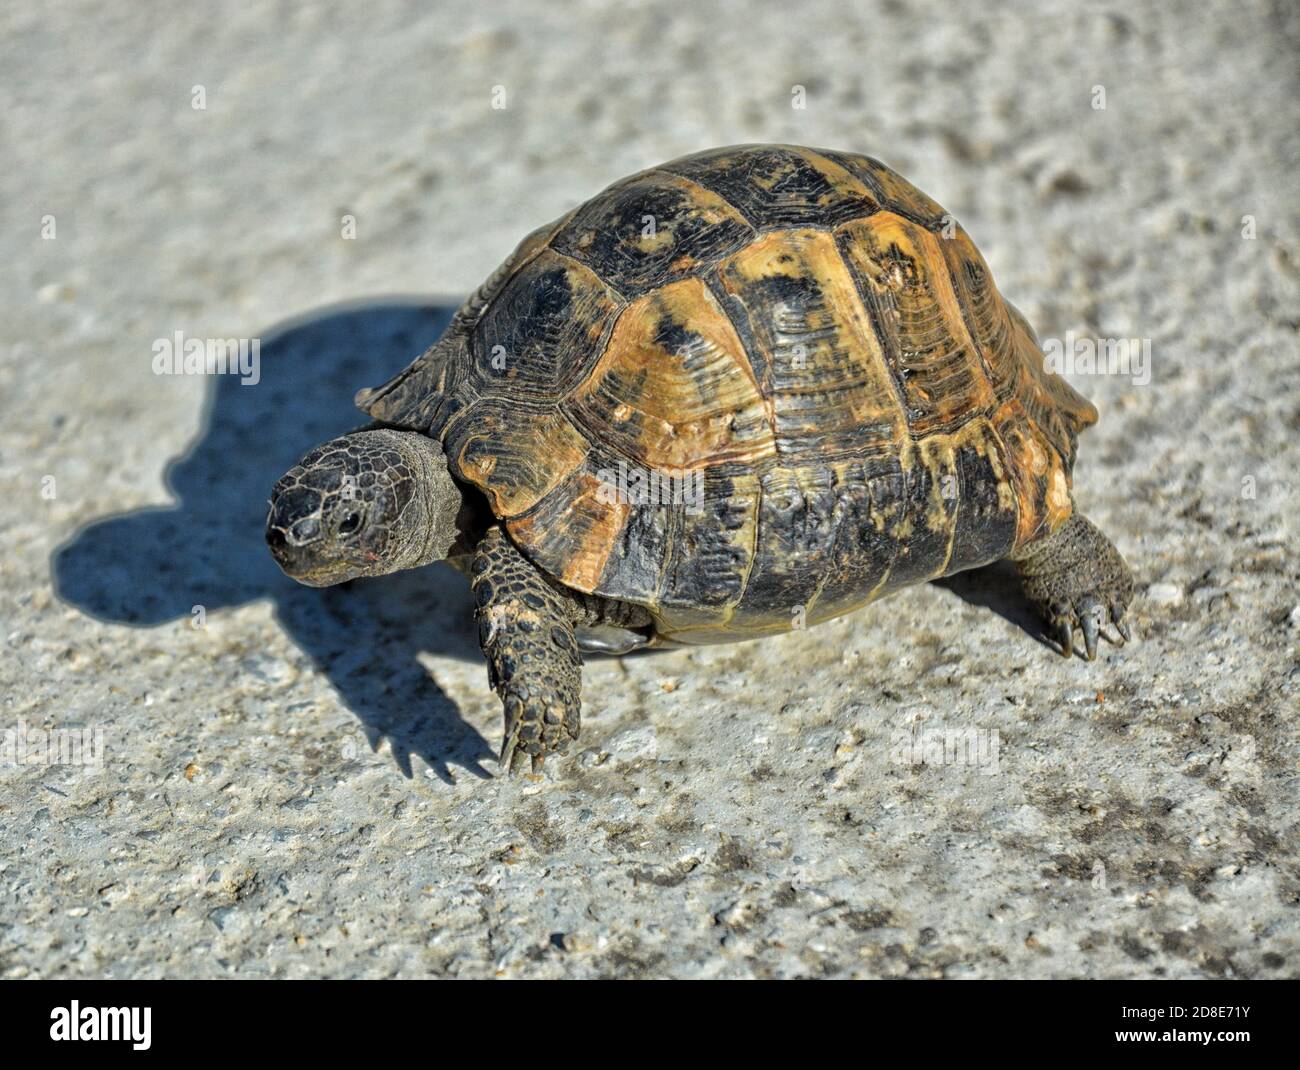 A tortoise in the city. Stock Photo